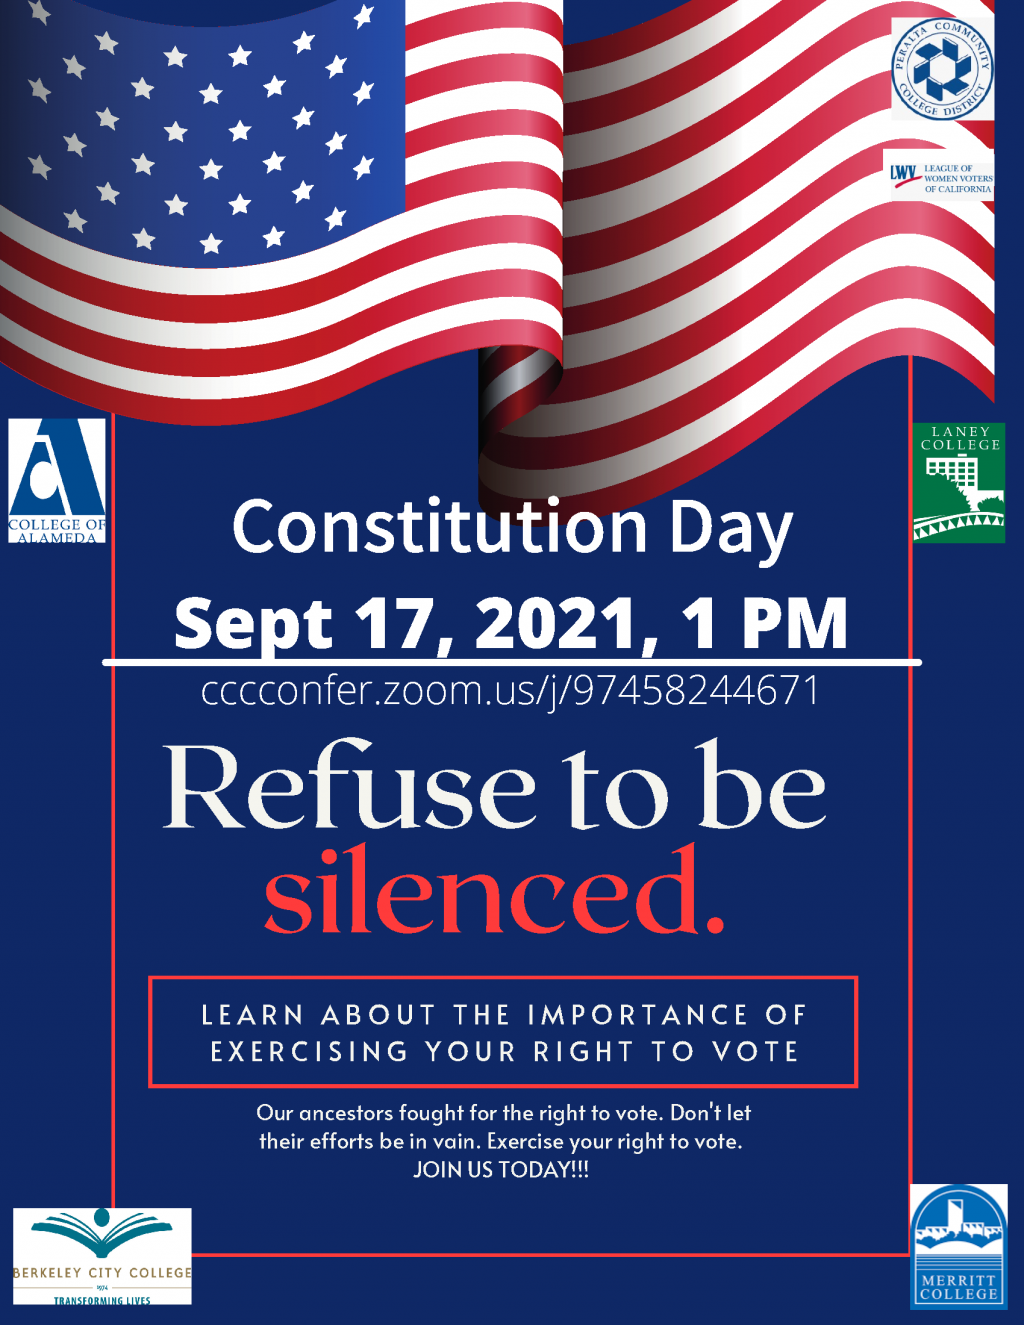 Click here for Zoom Recording of September 17, 2021 Constitution Day. Refuse to be silenced.